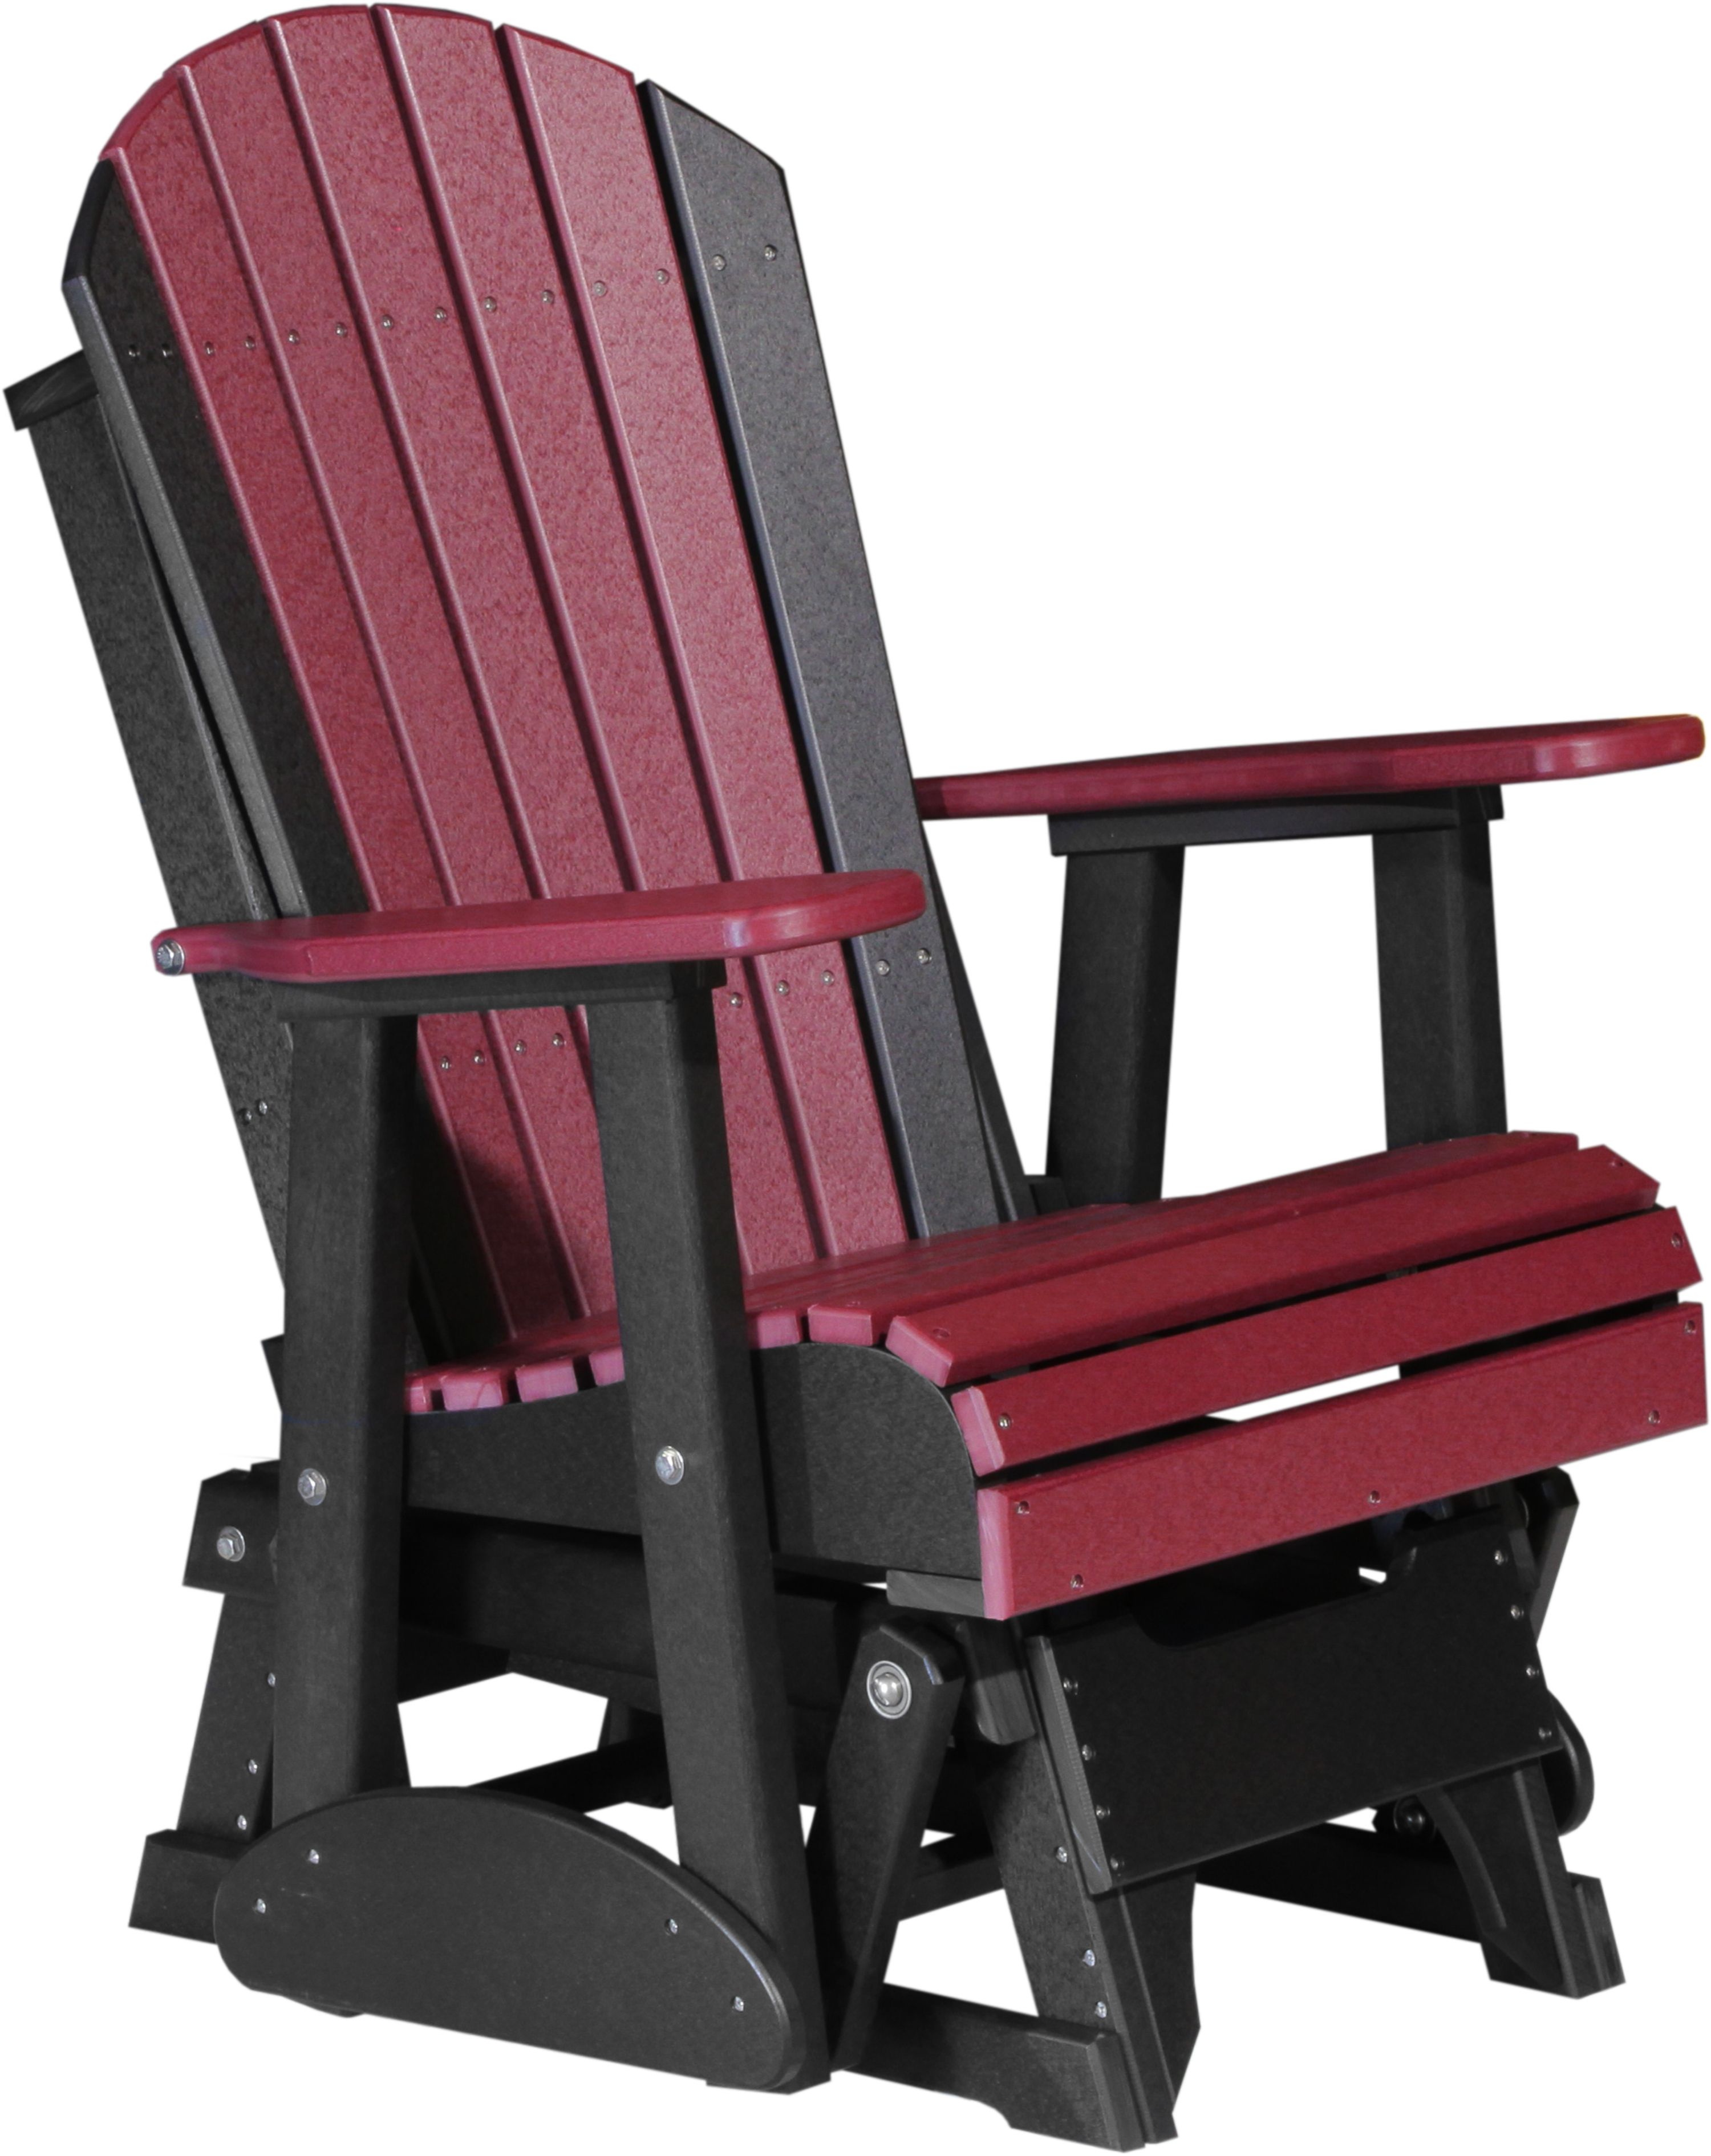 2018 The Terrific Best Of The Best Amish Outdoor Rocking Chairs Photo With Regard To Patio Rocking Chairs And Gliders (View 14 of 15)